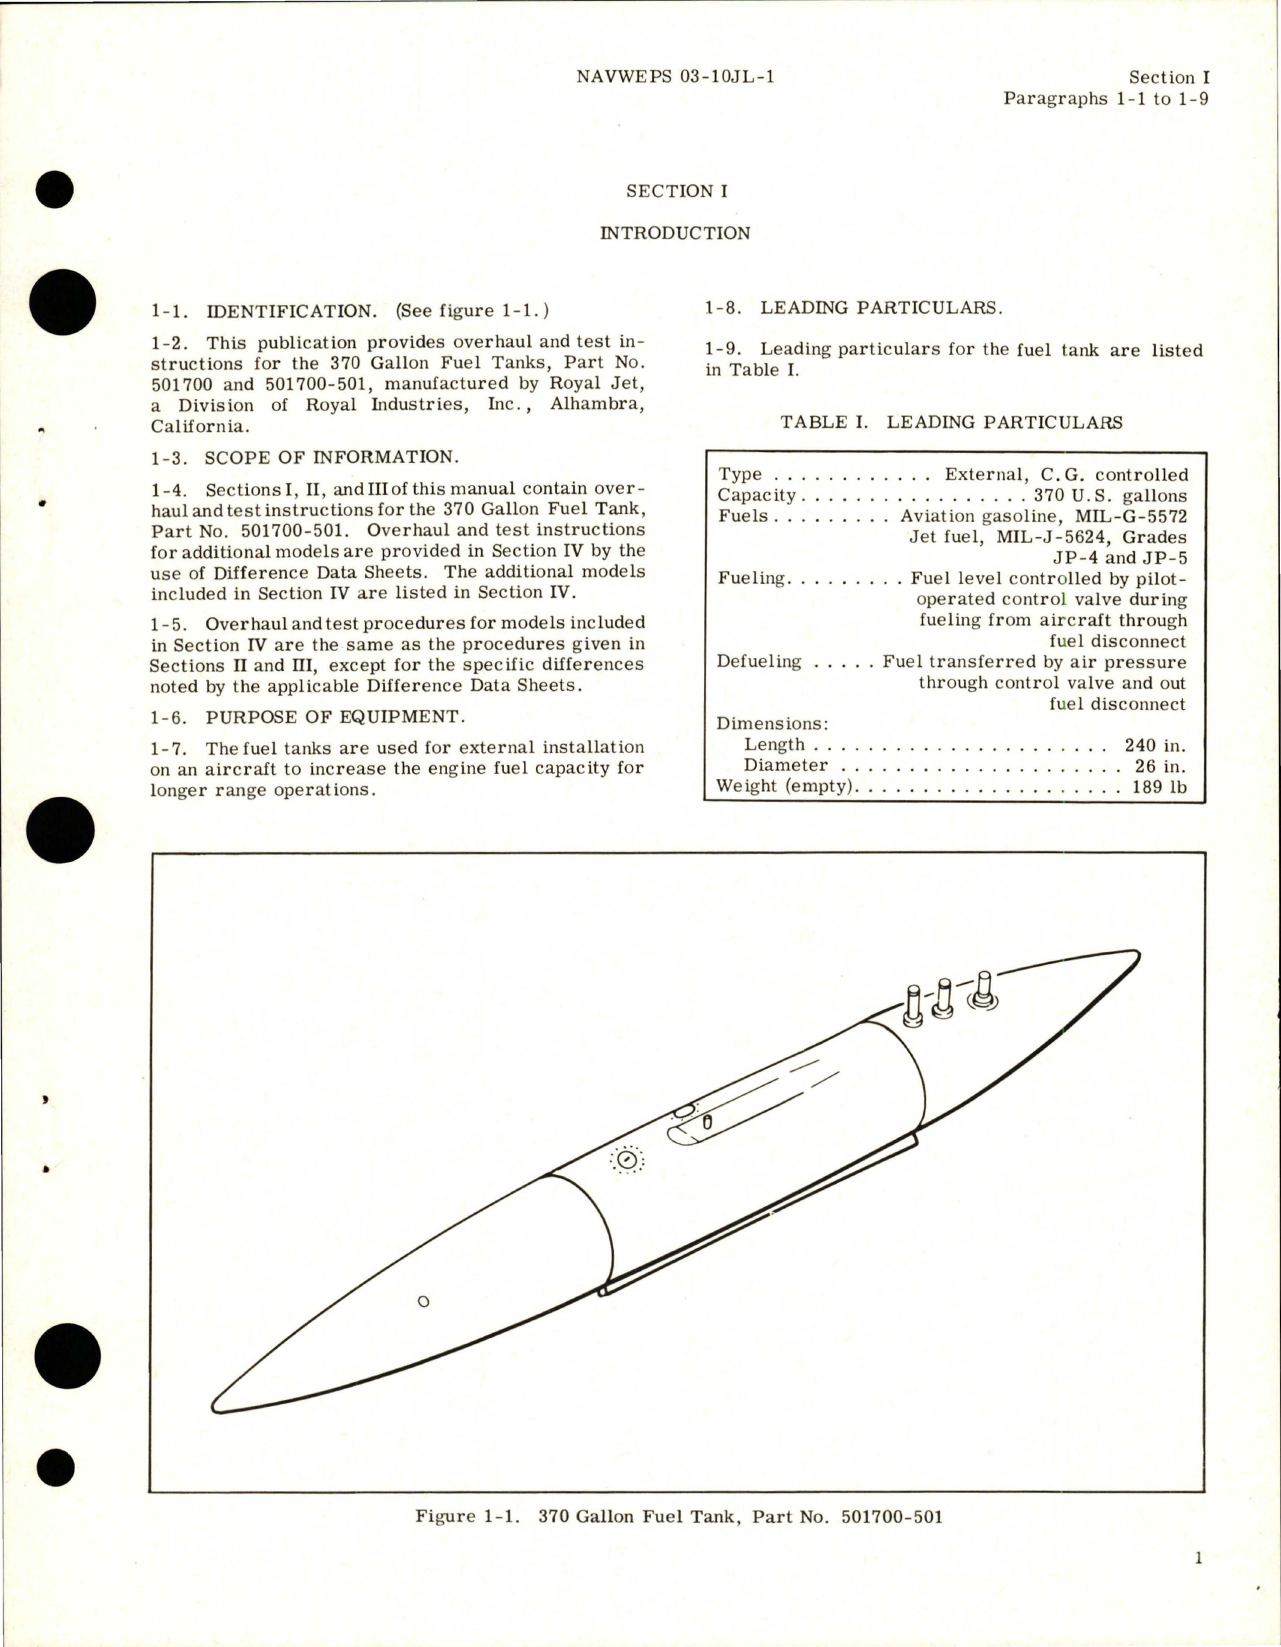 Sample page 5 from AirCorps Library document: Overhaul Instructions for Fuel Tanks - 370 Gallon - Parts 501700 and 501700-501